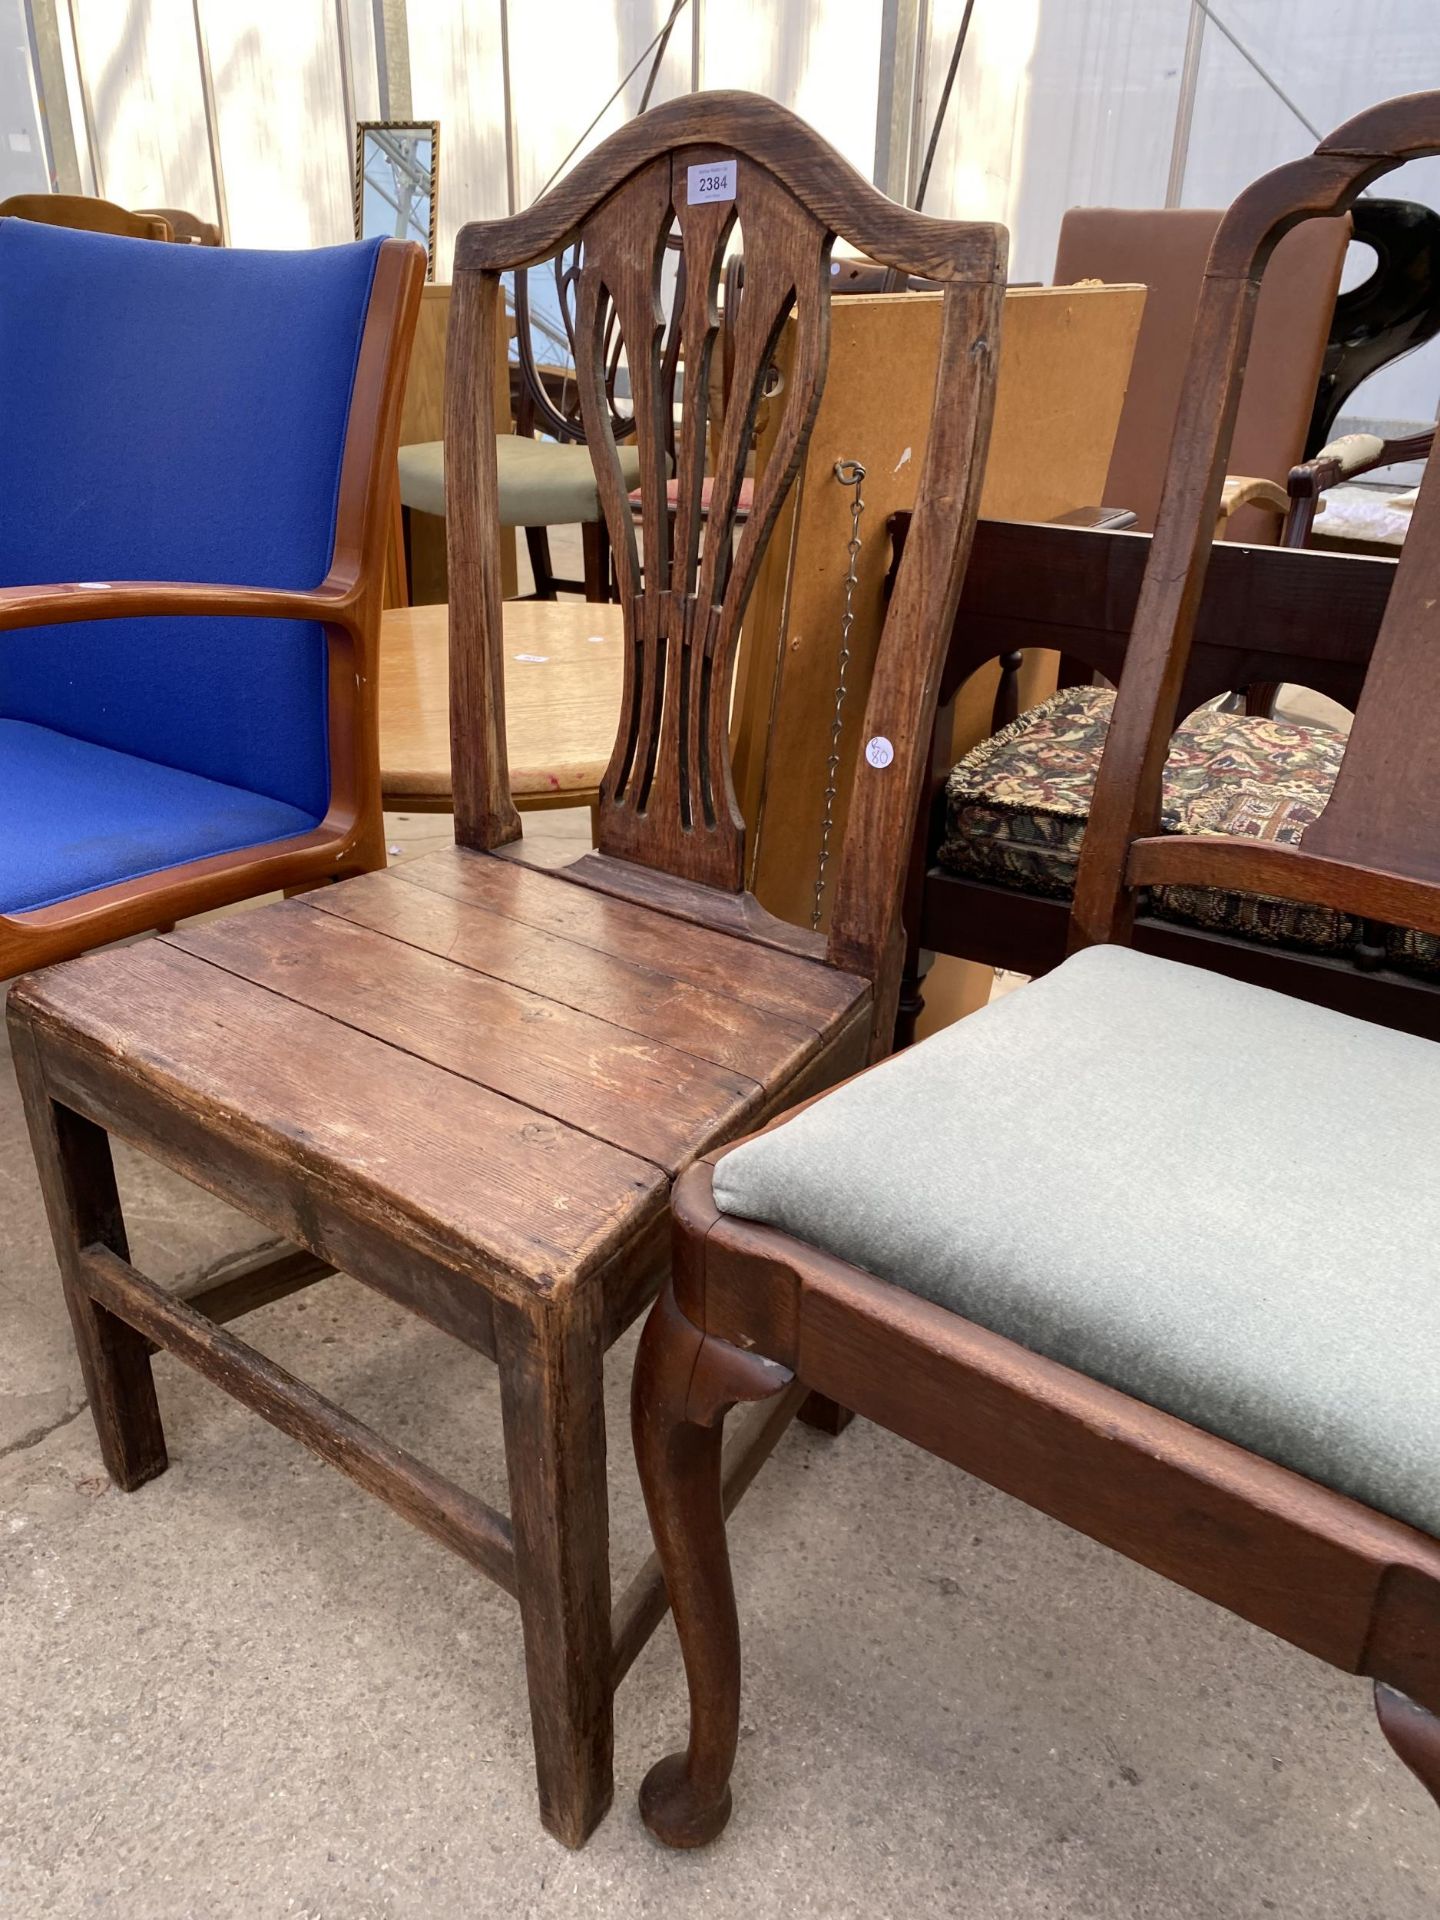 A 19TH CENTURY ELM AND BEECH SPLAT BACK CHAIR AND QUEEN ANNE STYLE CHAIR - Image 2 of 3